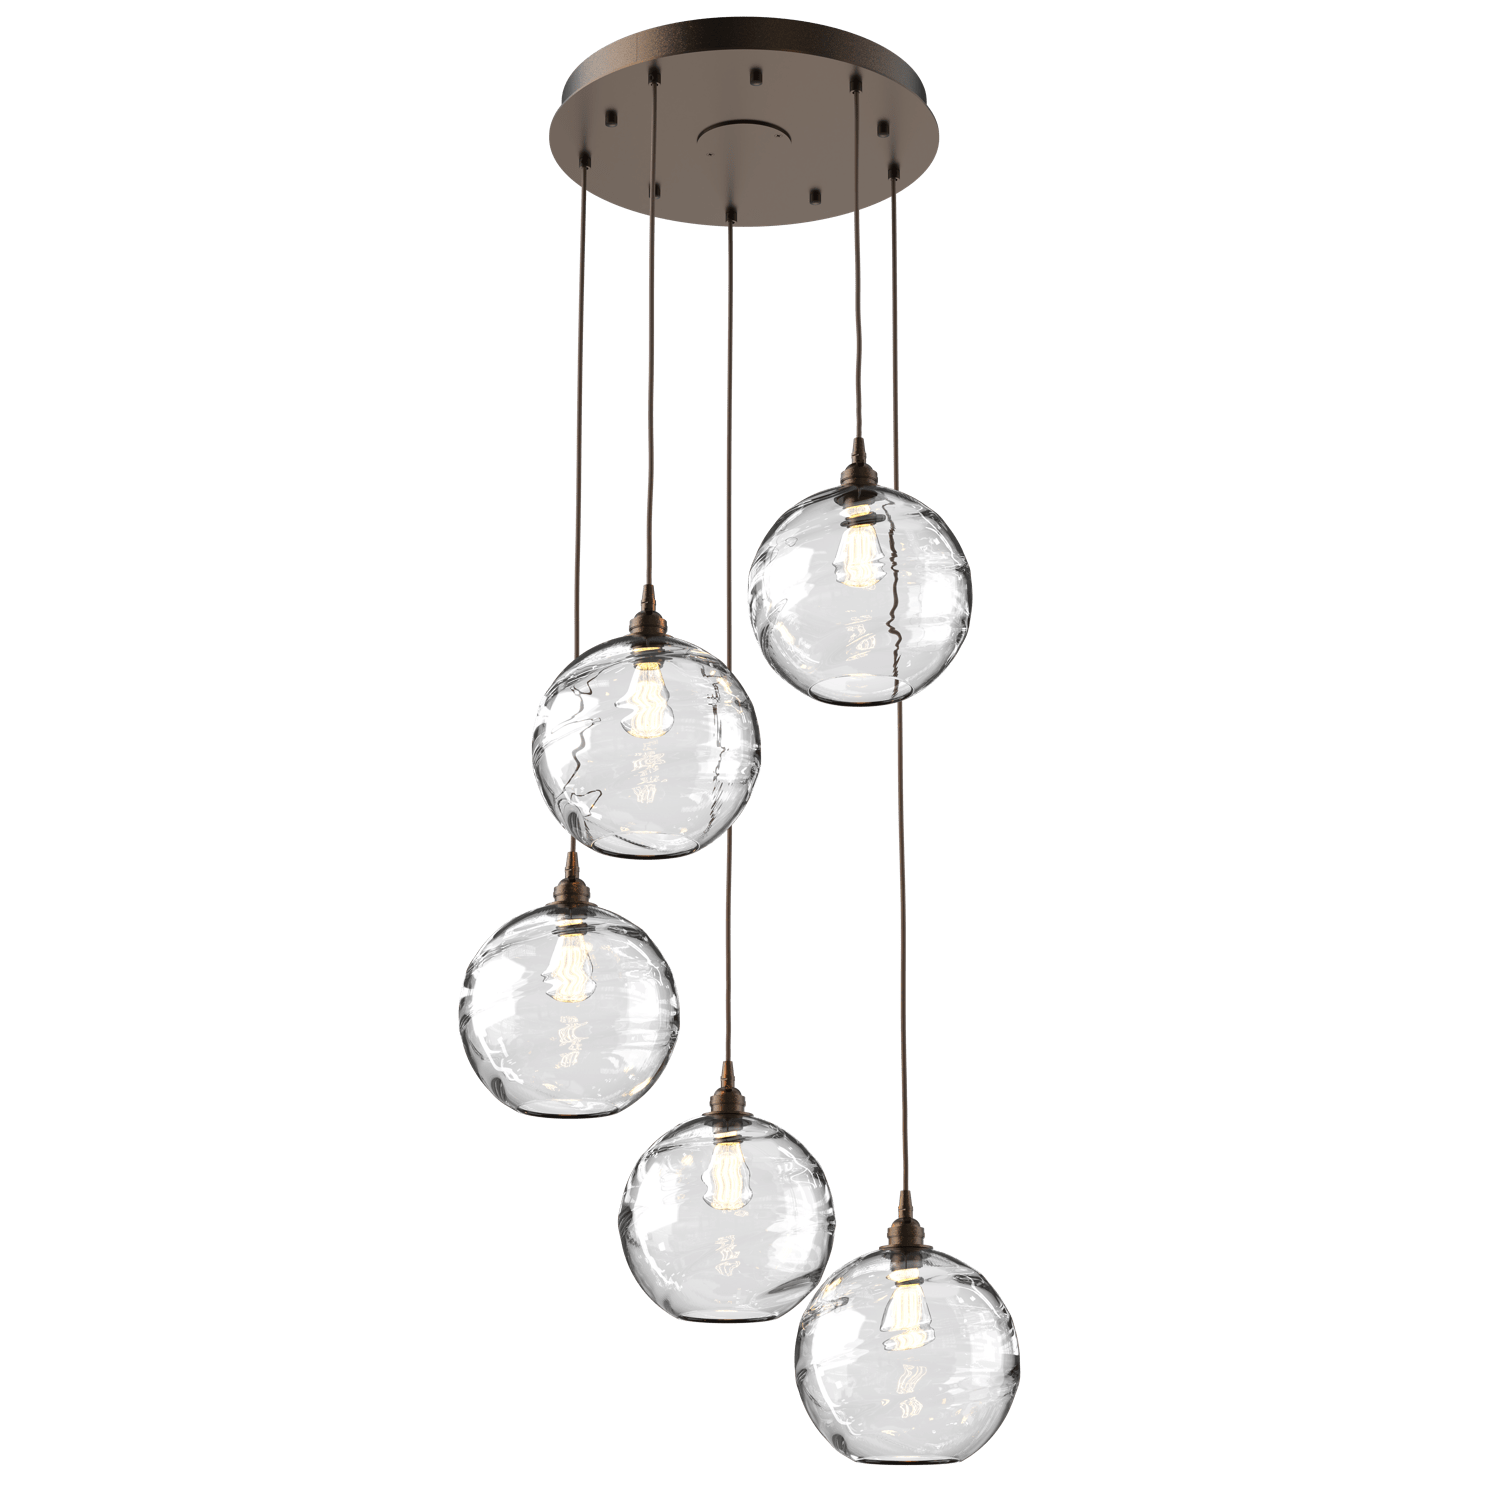 CHB0047-05-FB-OC-Hammerton-Studio-Optic-Blown-Glass-Terra-5-light-round-pendant-chandelier-with-flat-bronze-finish-and-optic-clear-blown-glass-shades-and-incandescent-lamping